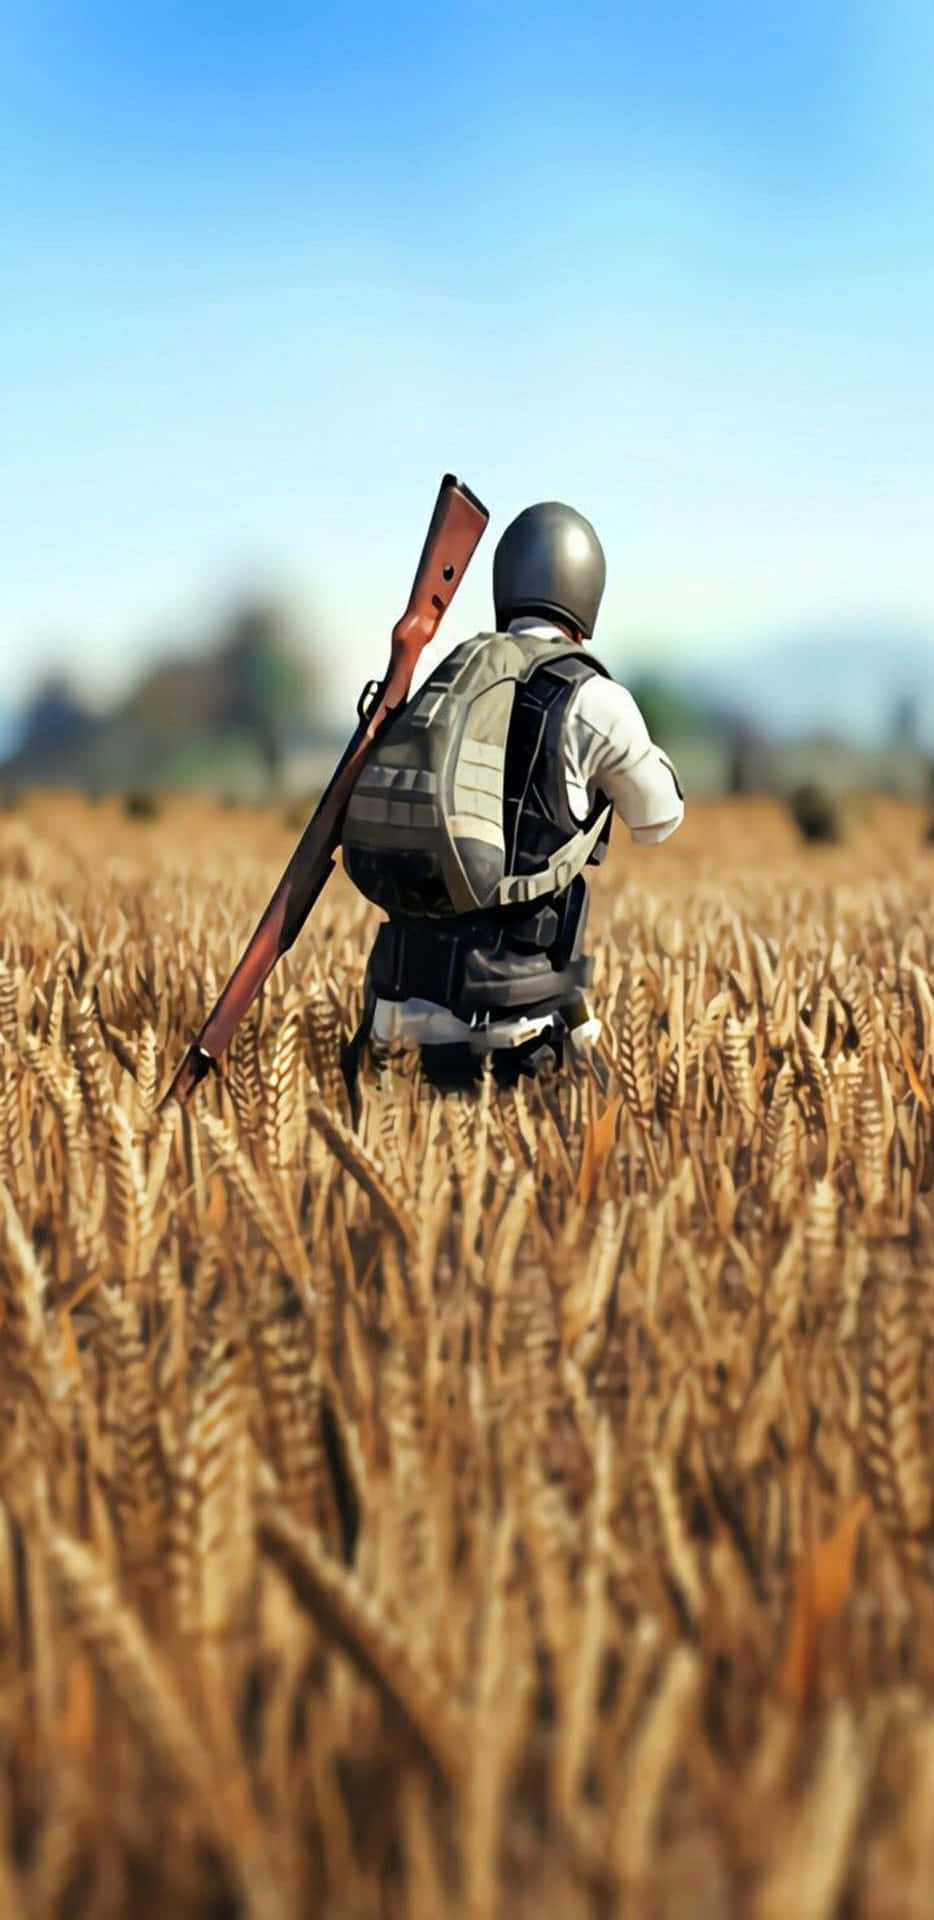 Pixel 3xl Playerunknown's Battlegrounds Background A Player In A Wheat Field